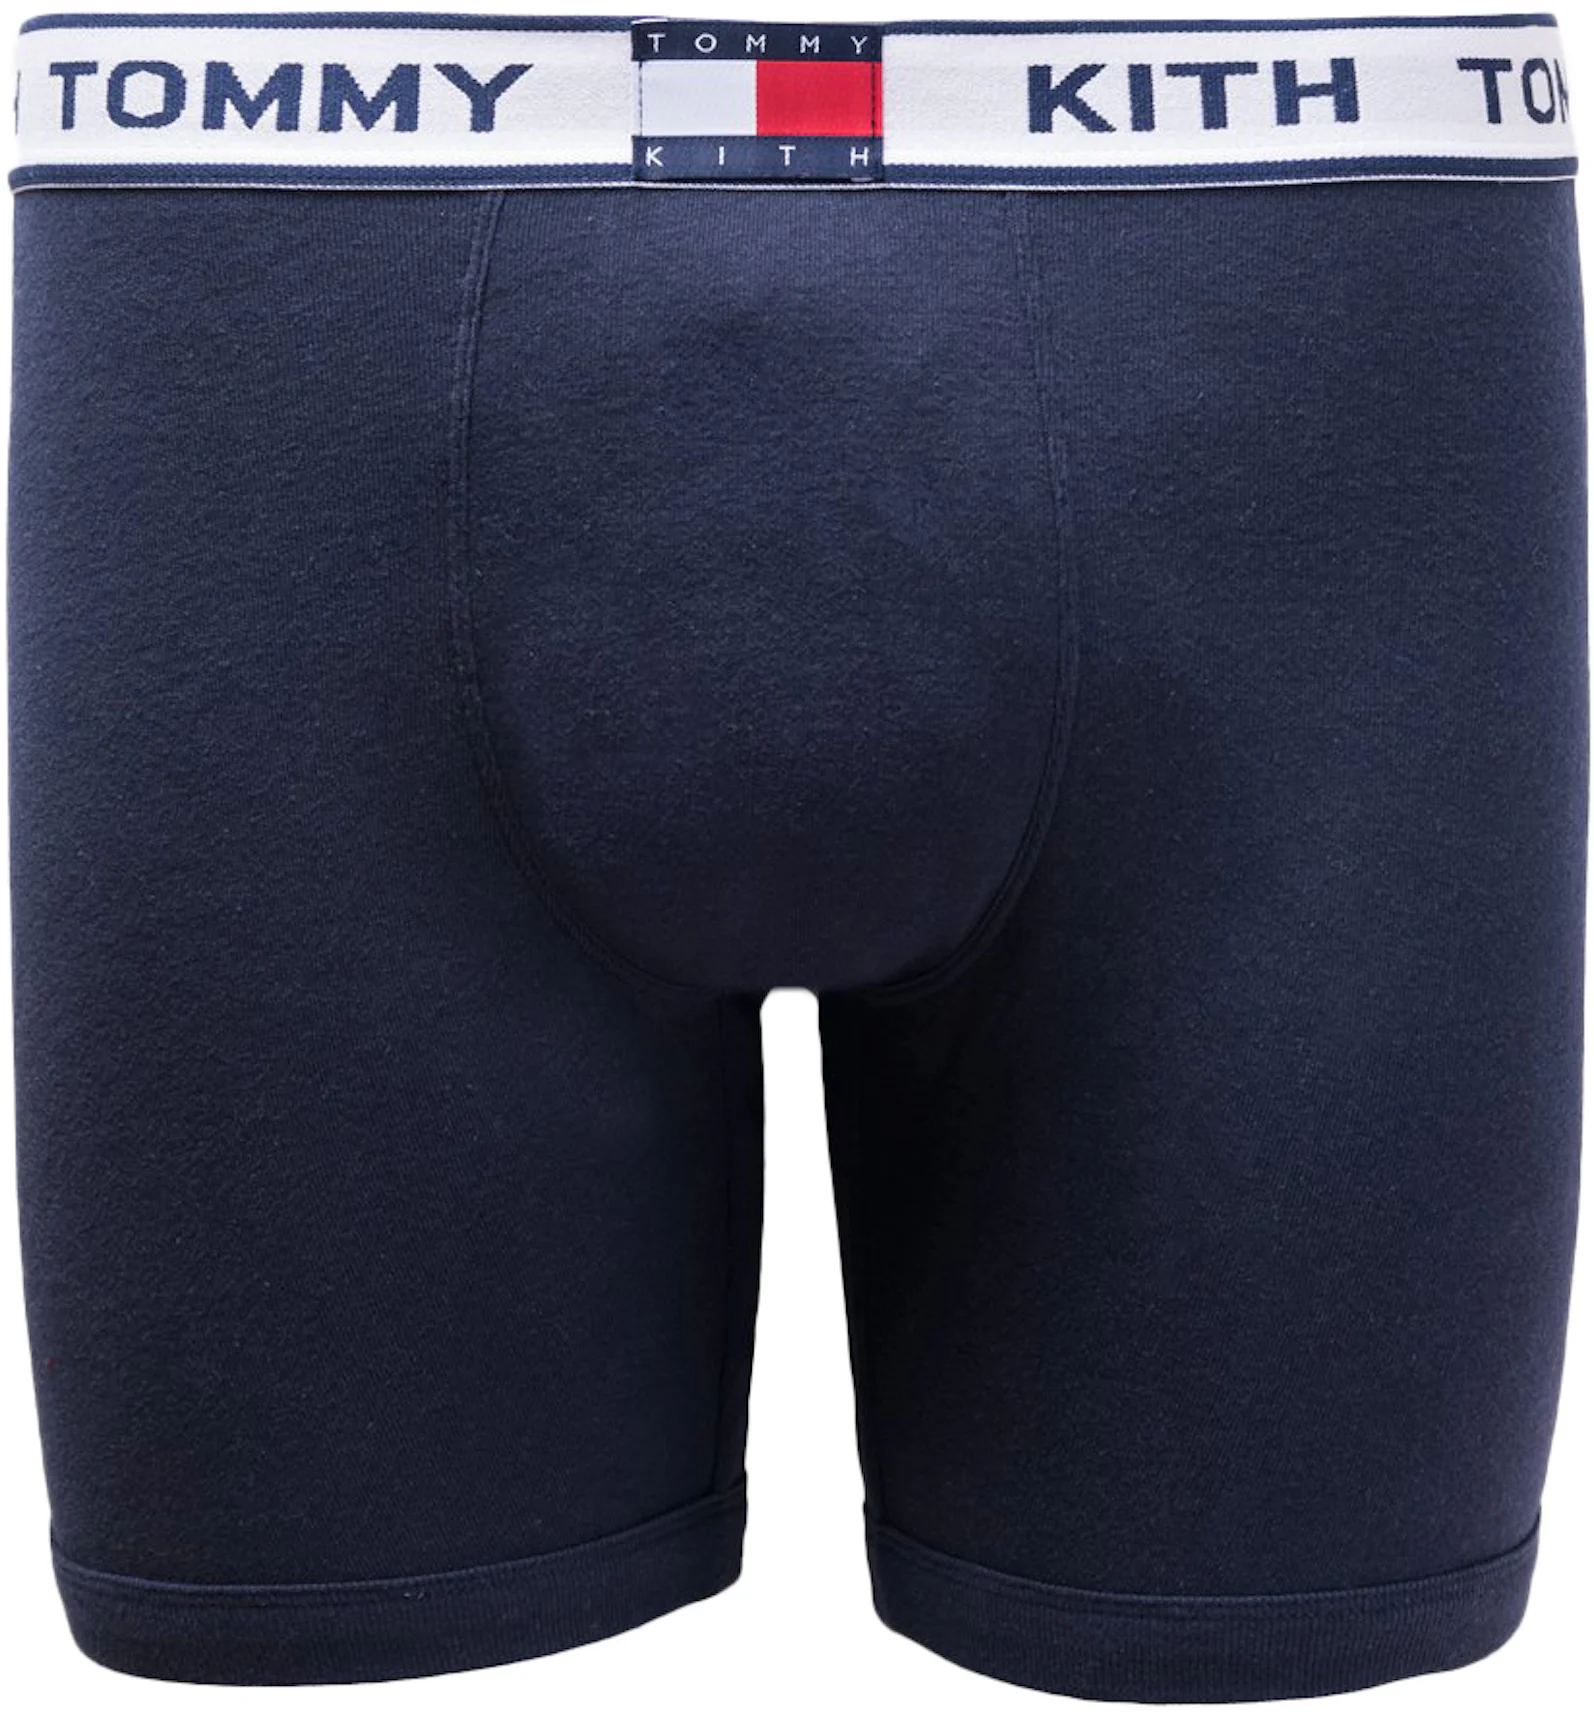 Kith x Tommy Hilfiger Tommy Boxer Brief Navy Men's - FW18 - US